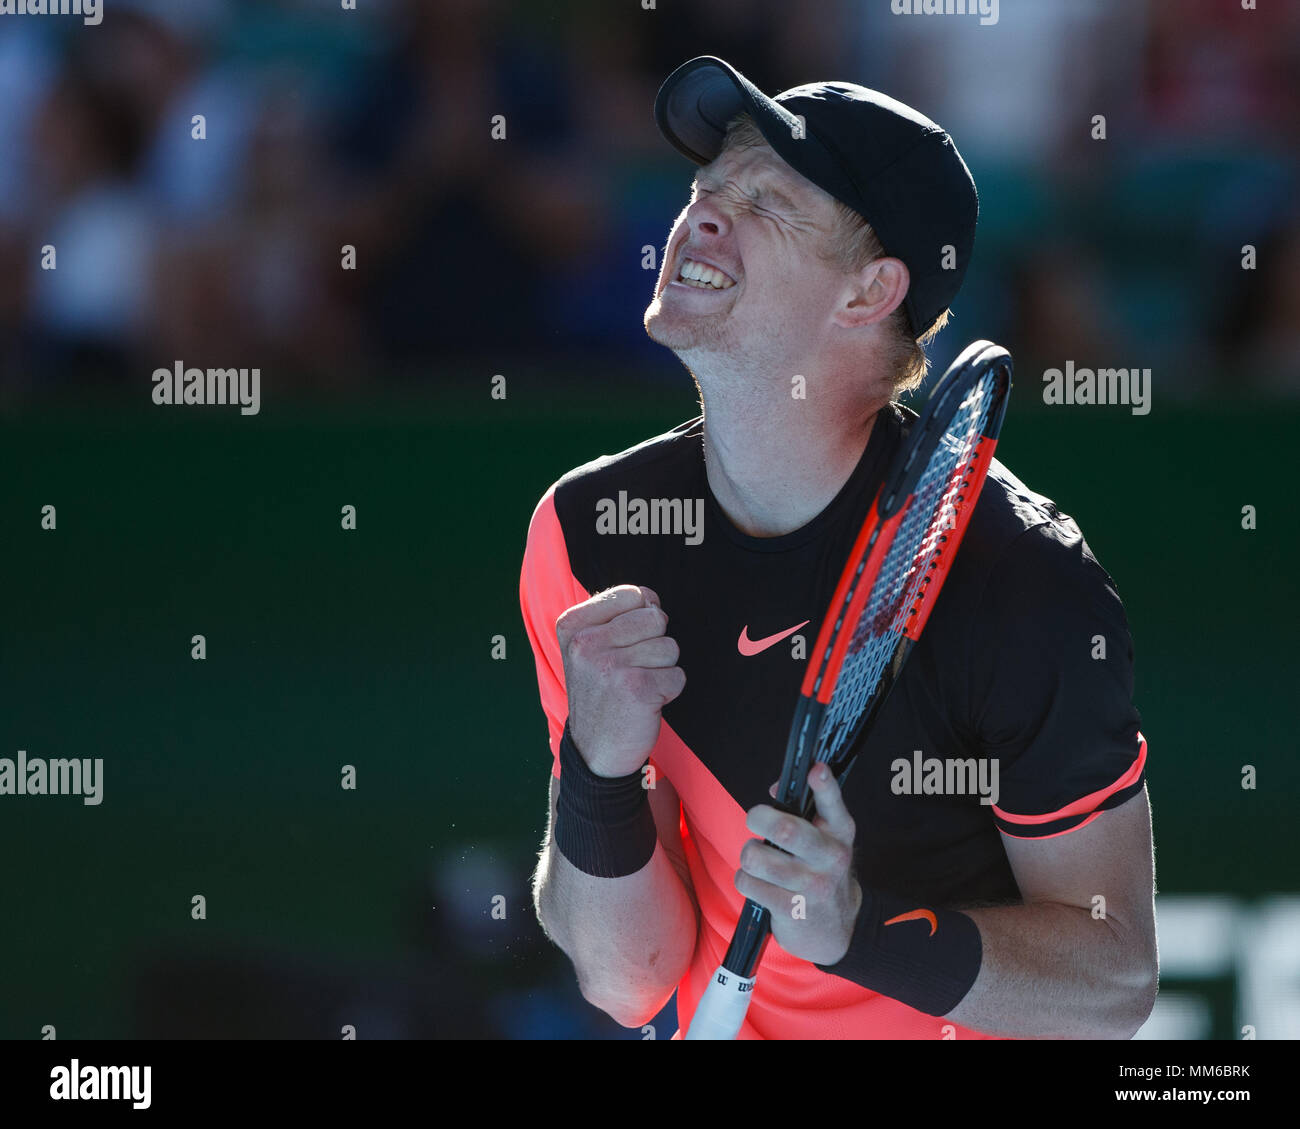 British tennis player Kyle Edmund making a fist and cheering during men's singles match in Australian Open 2018 Tennis Tournament, Melbourne Park, Mel Stock Photo